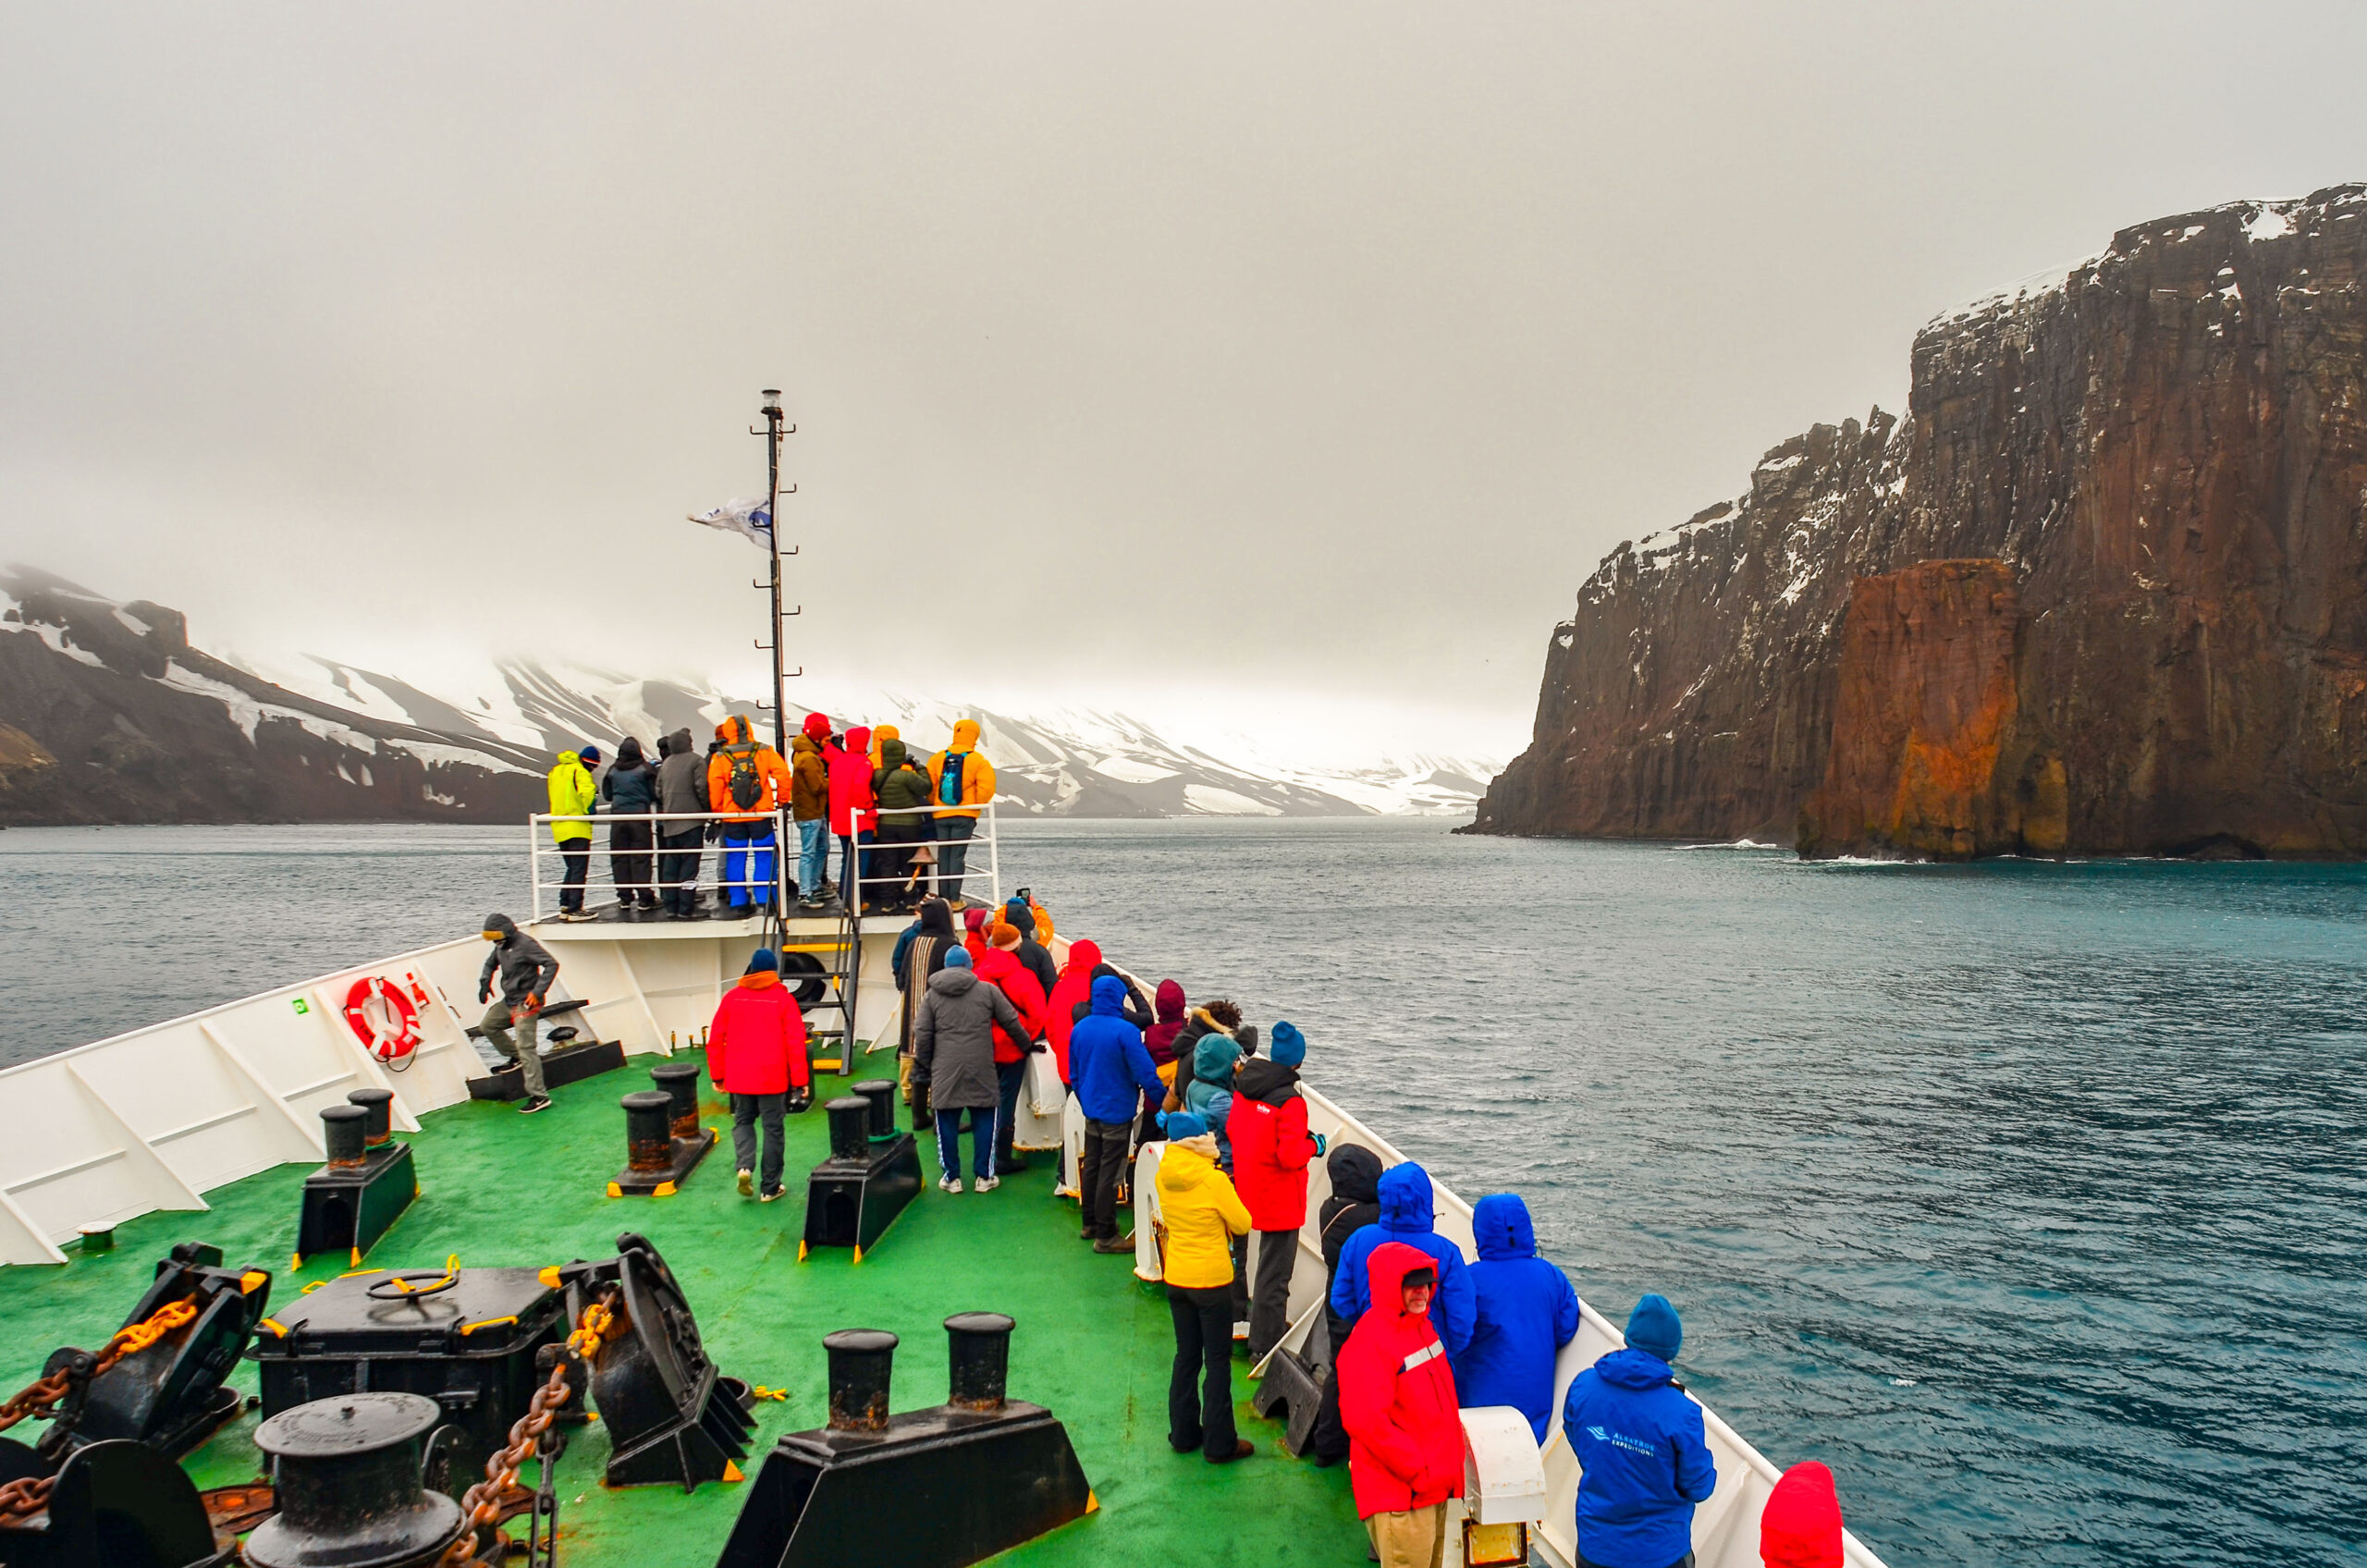 Prepare for Motion Sickness in Antarctica and the Drake Passage